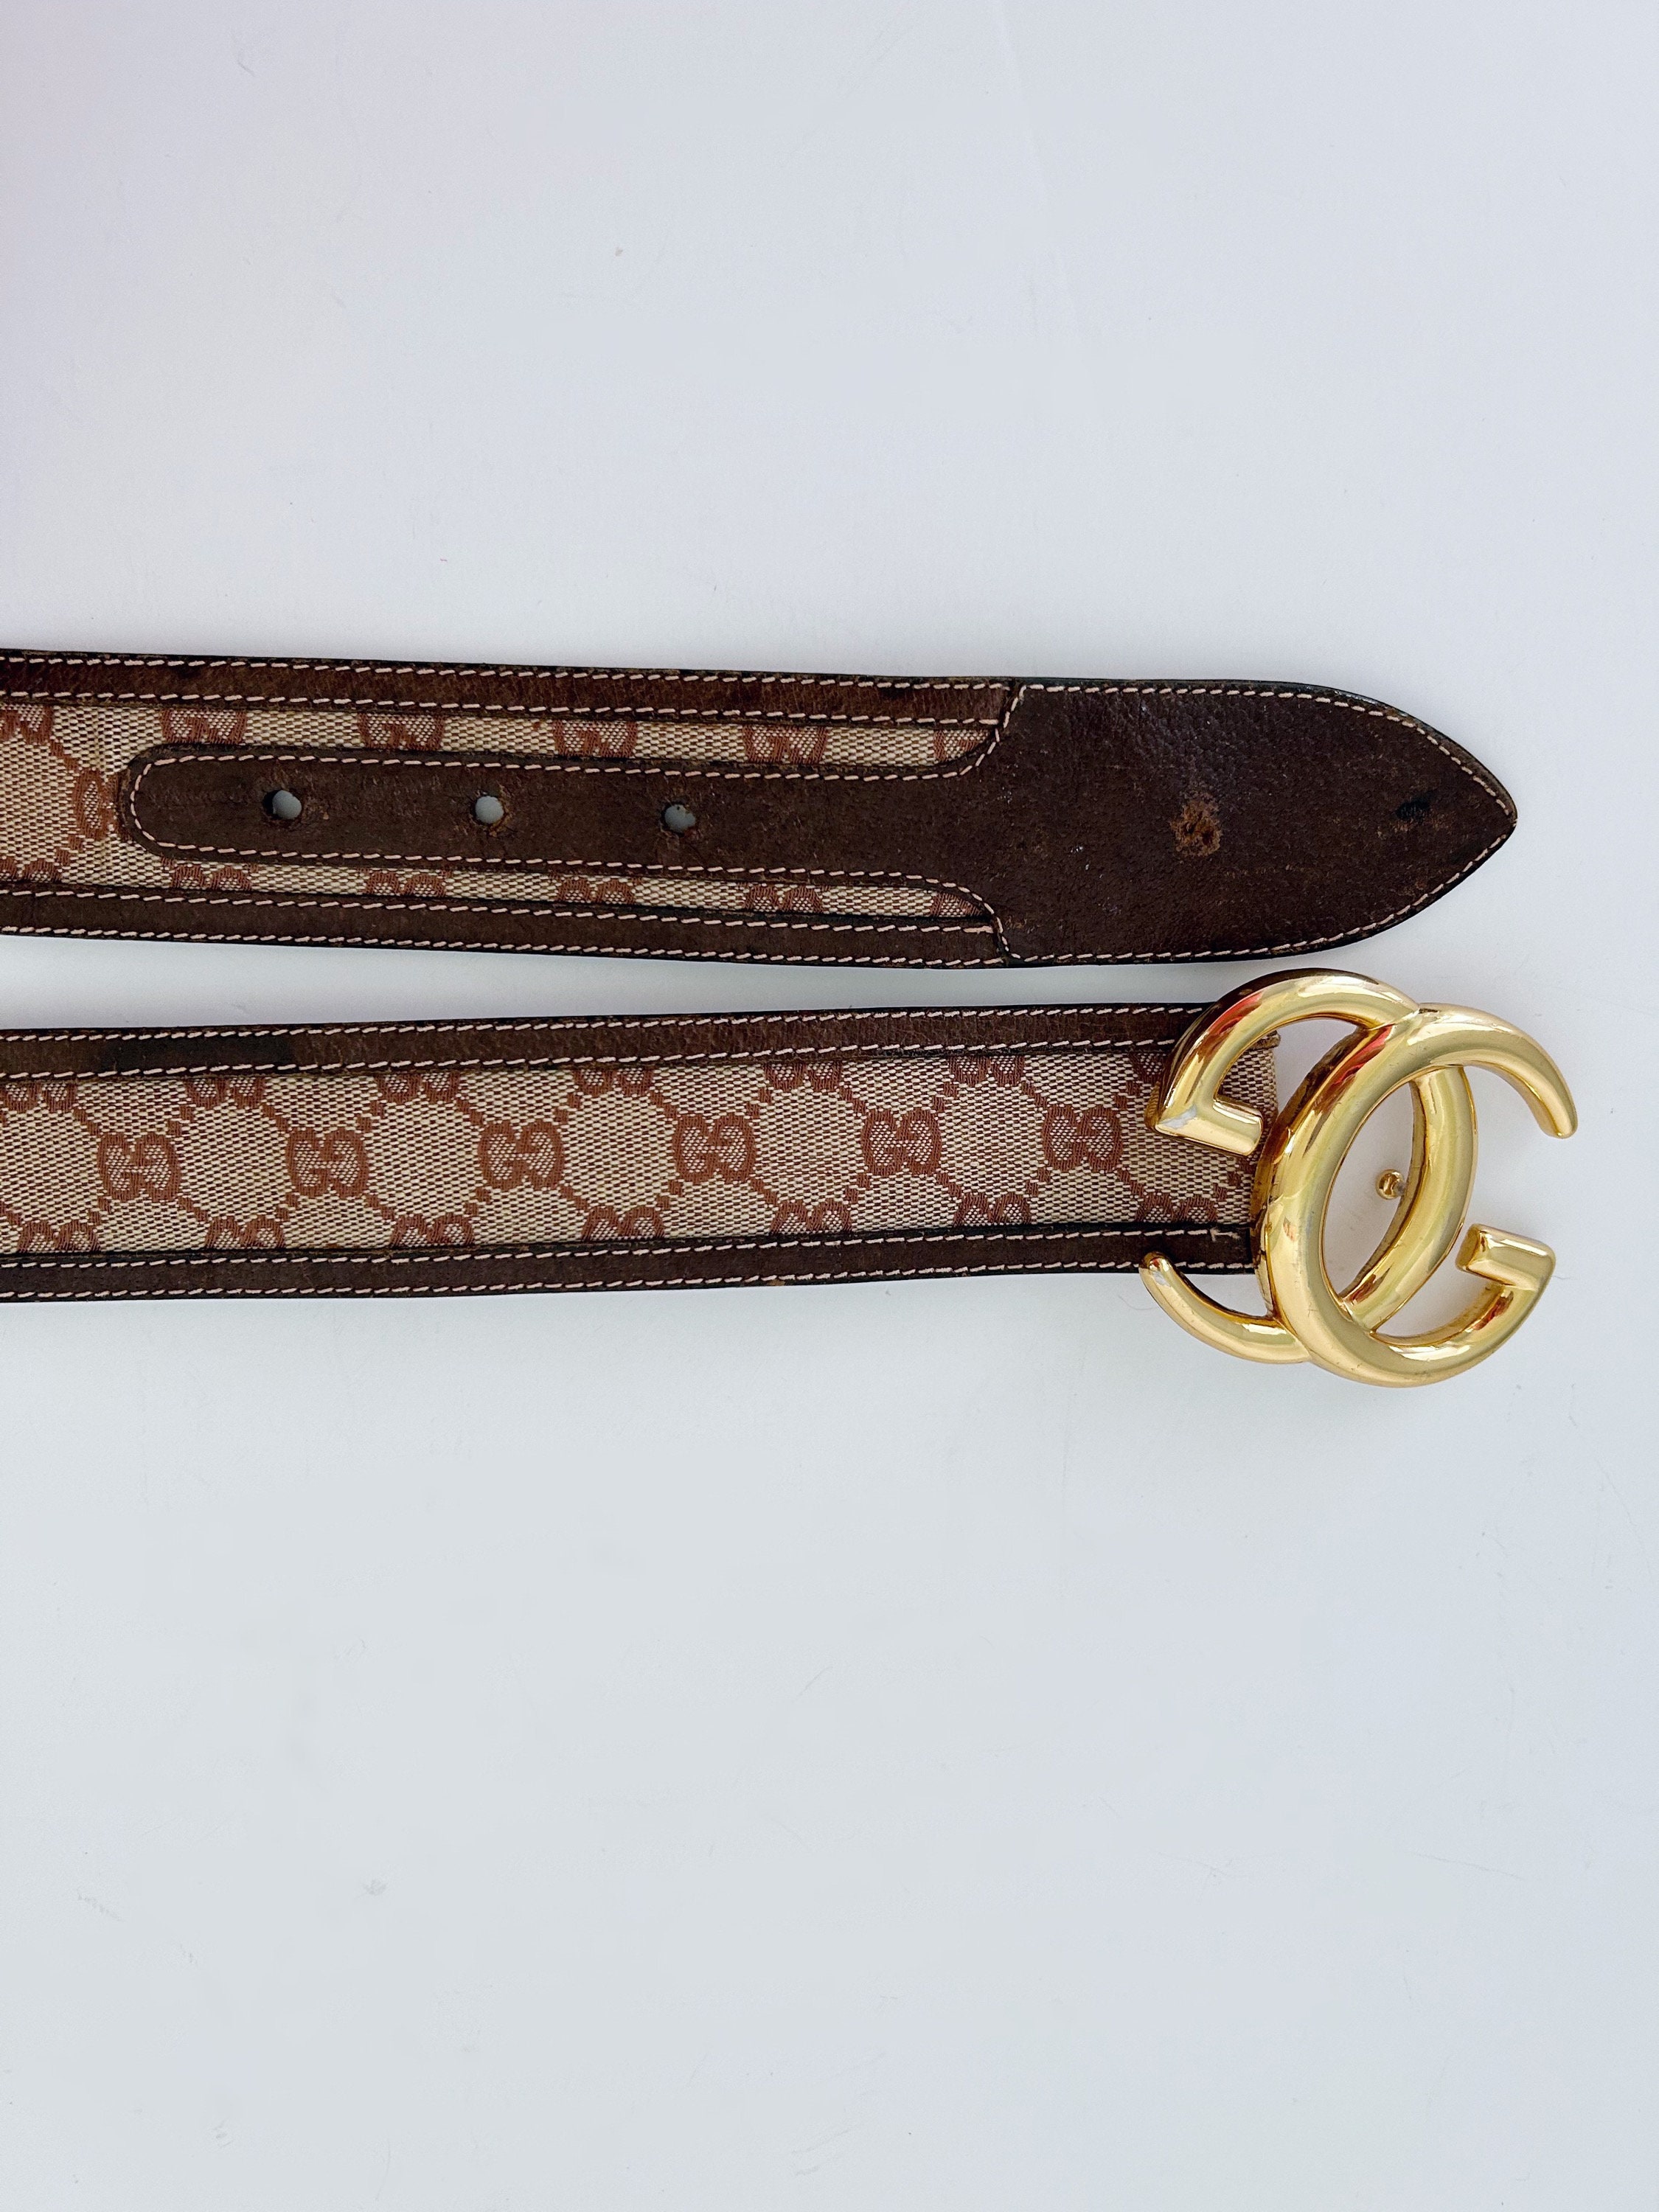 Gucci Print Belt Bag Vintage Logo Small White in Leather with Brass - US